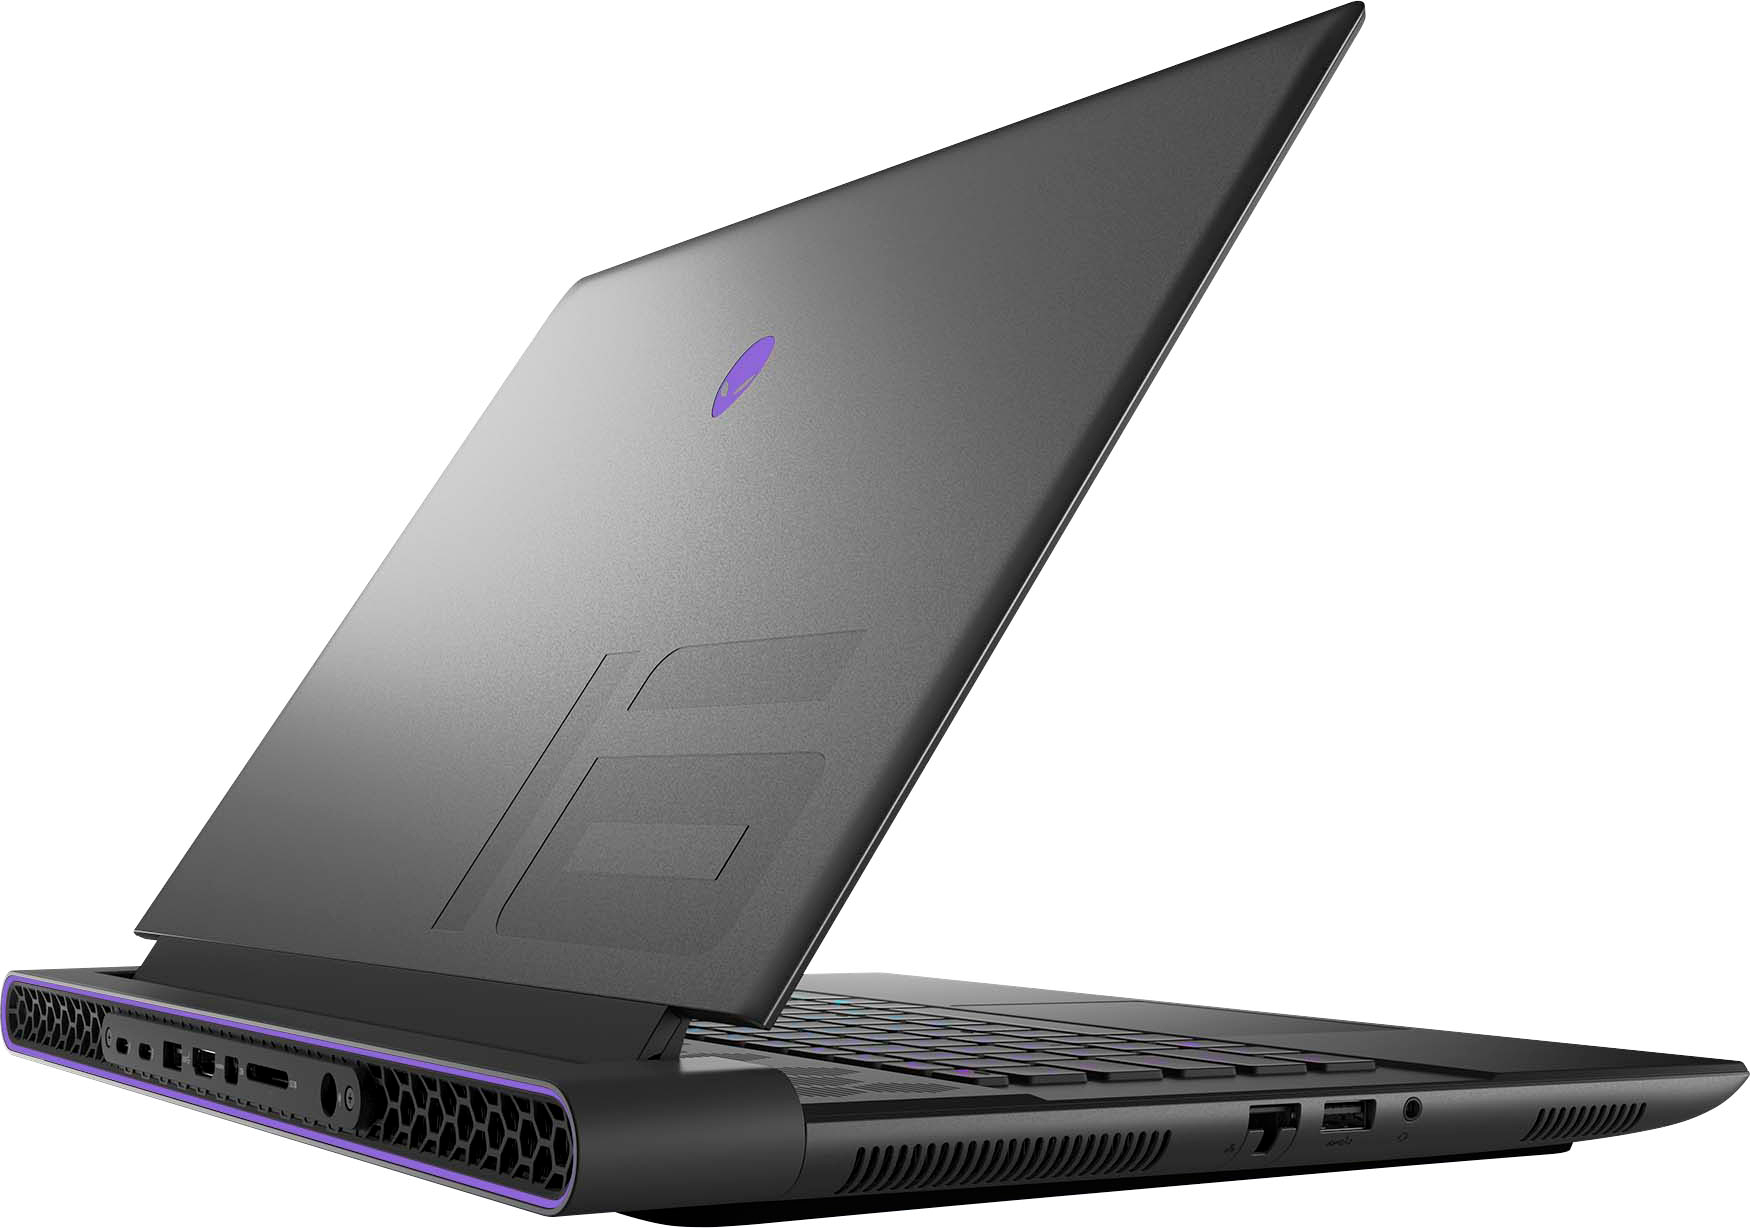 Alienware m16 officially revealed with up to a Core i9-13900HX